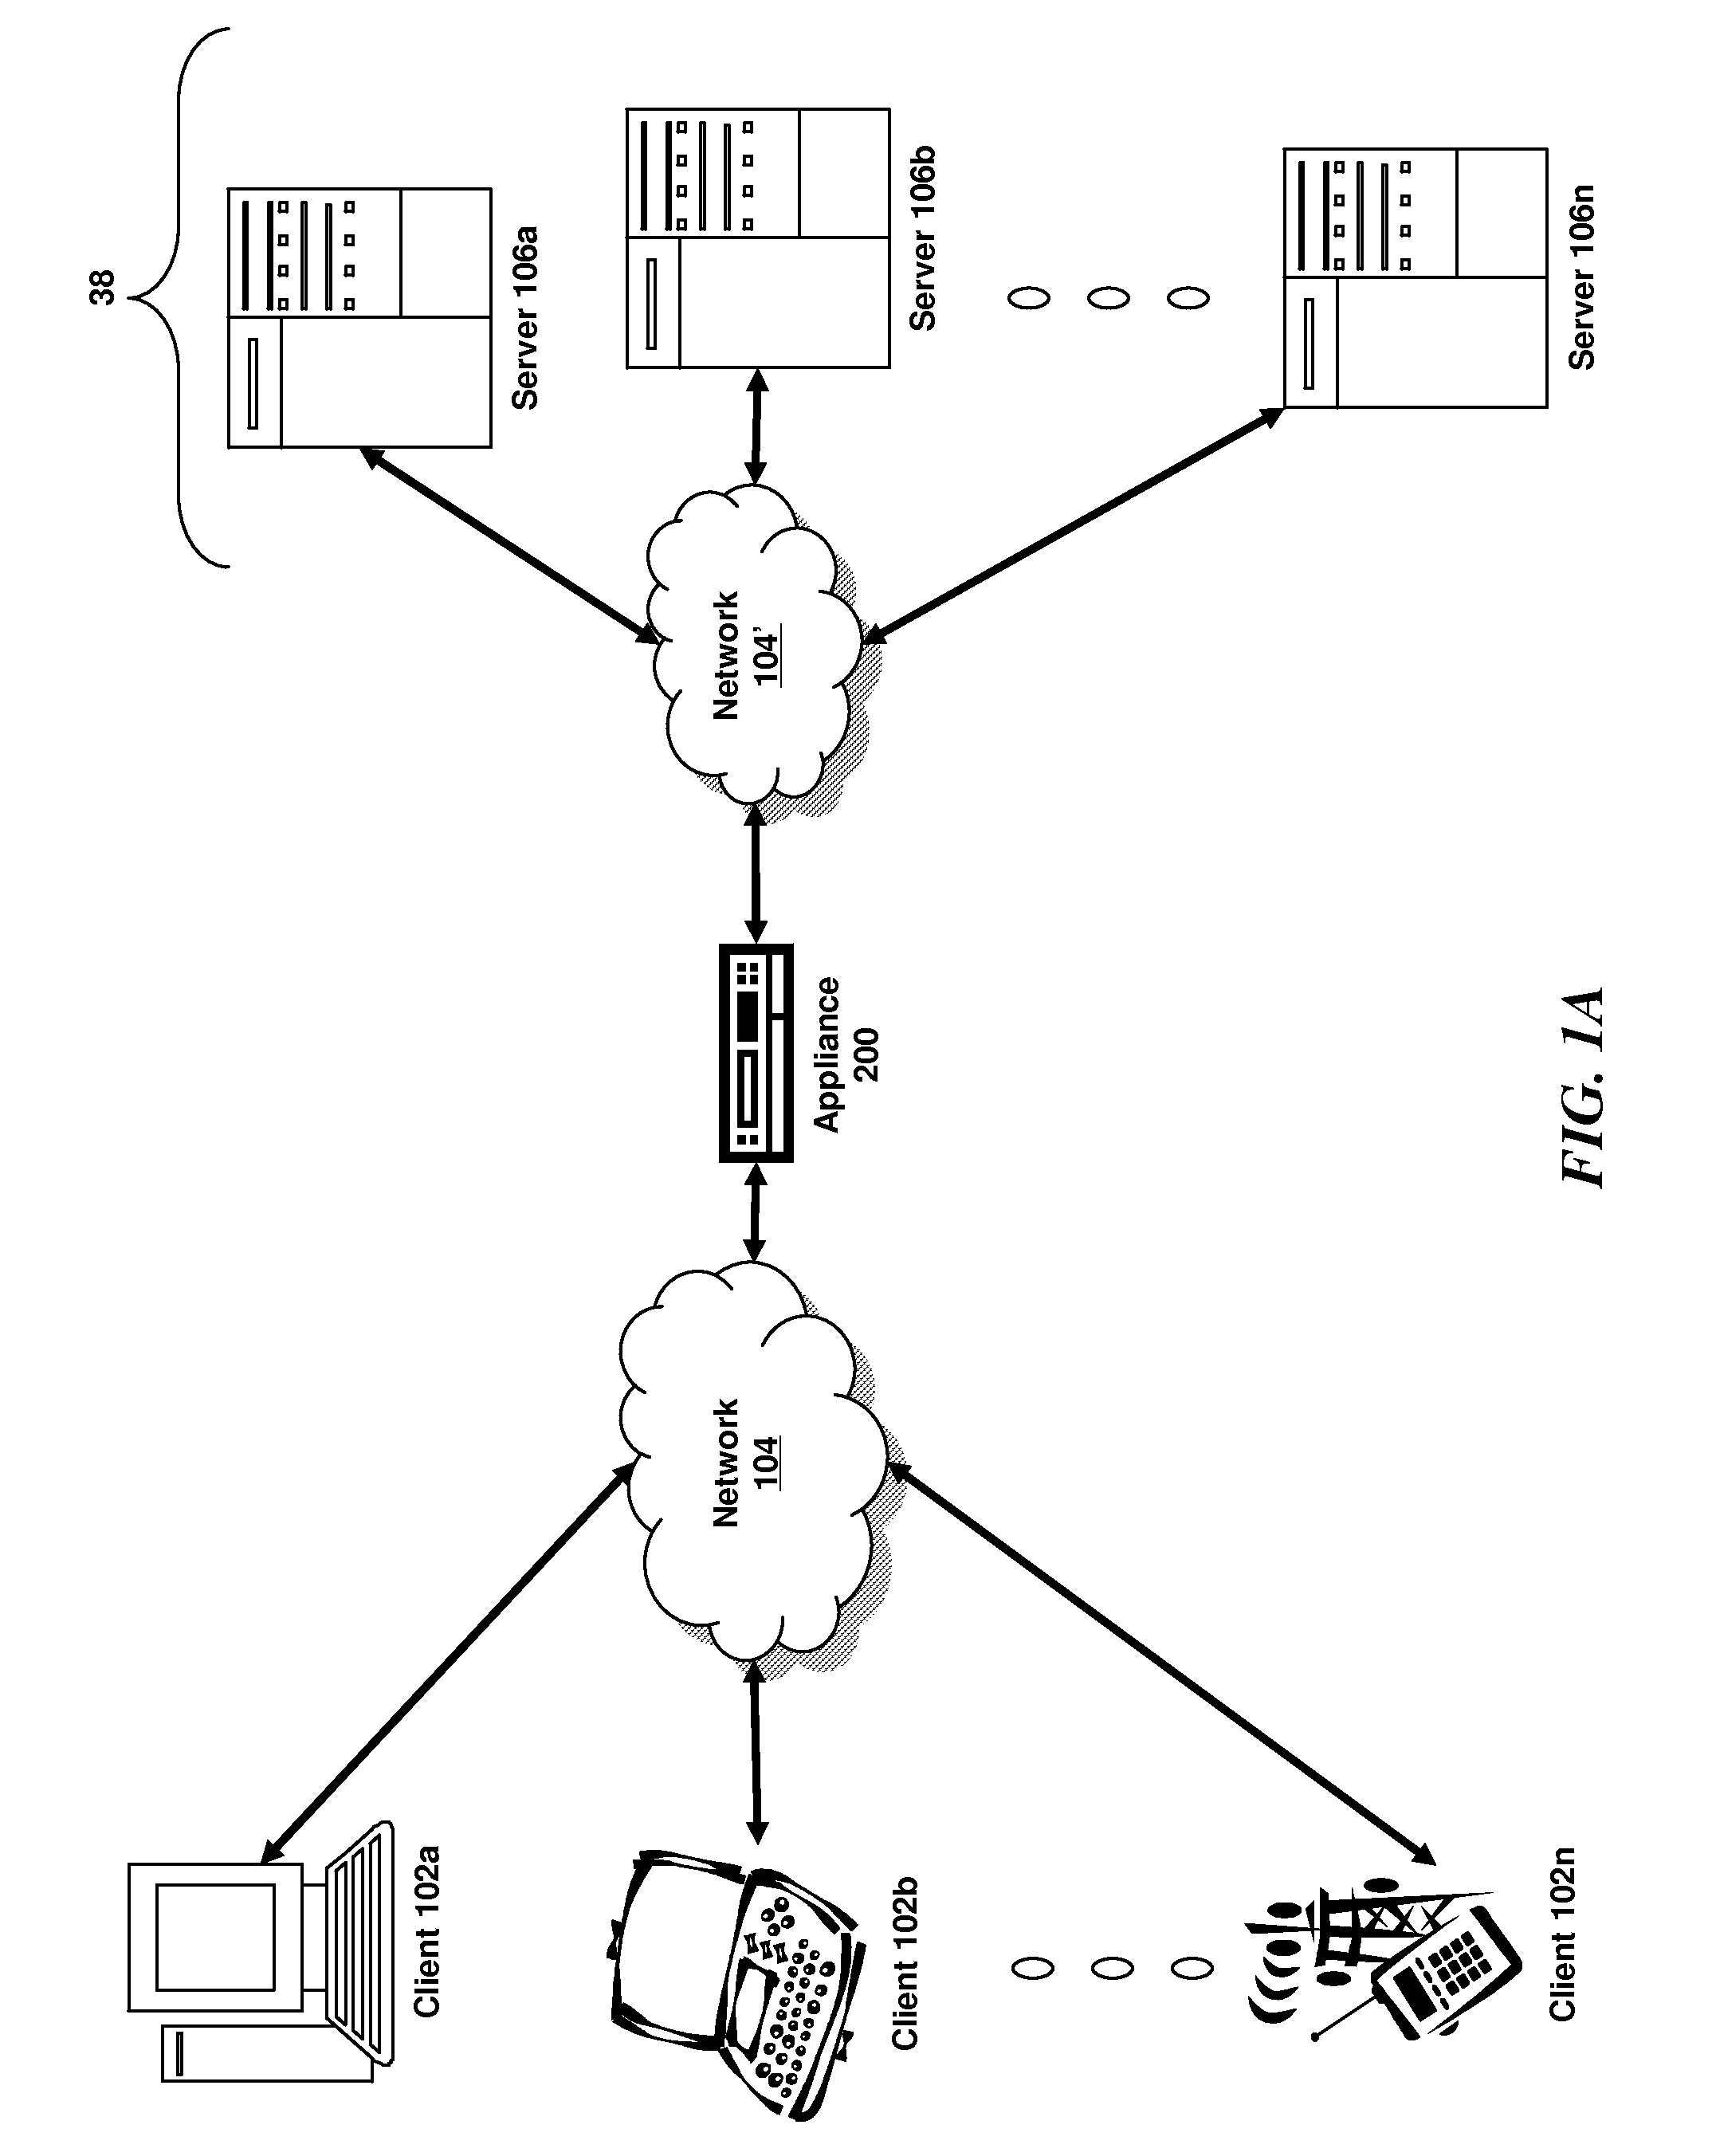 Systems and methods for detecting incomplete requests, TCP timeouts and application timeouts